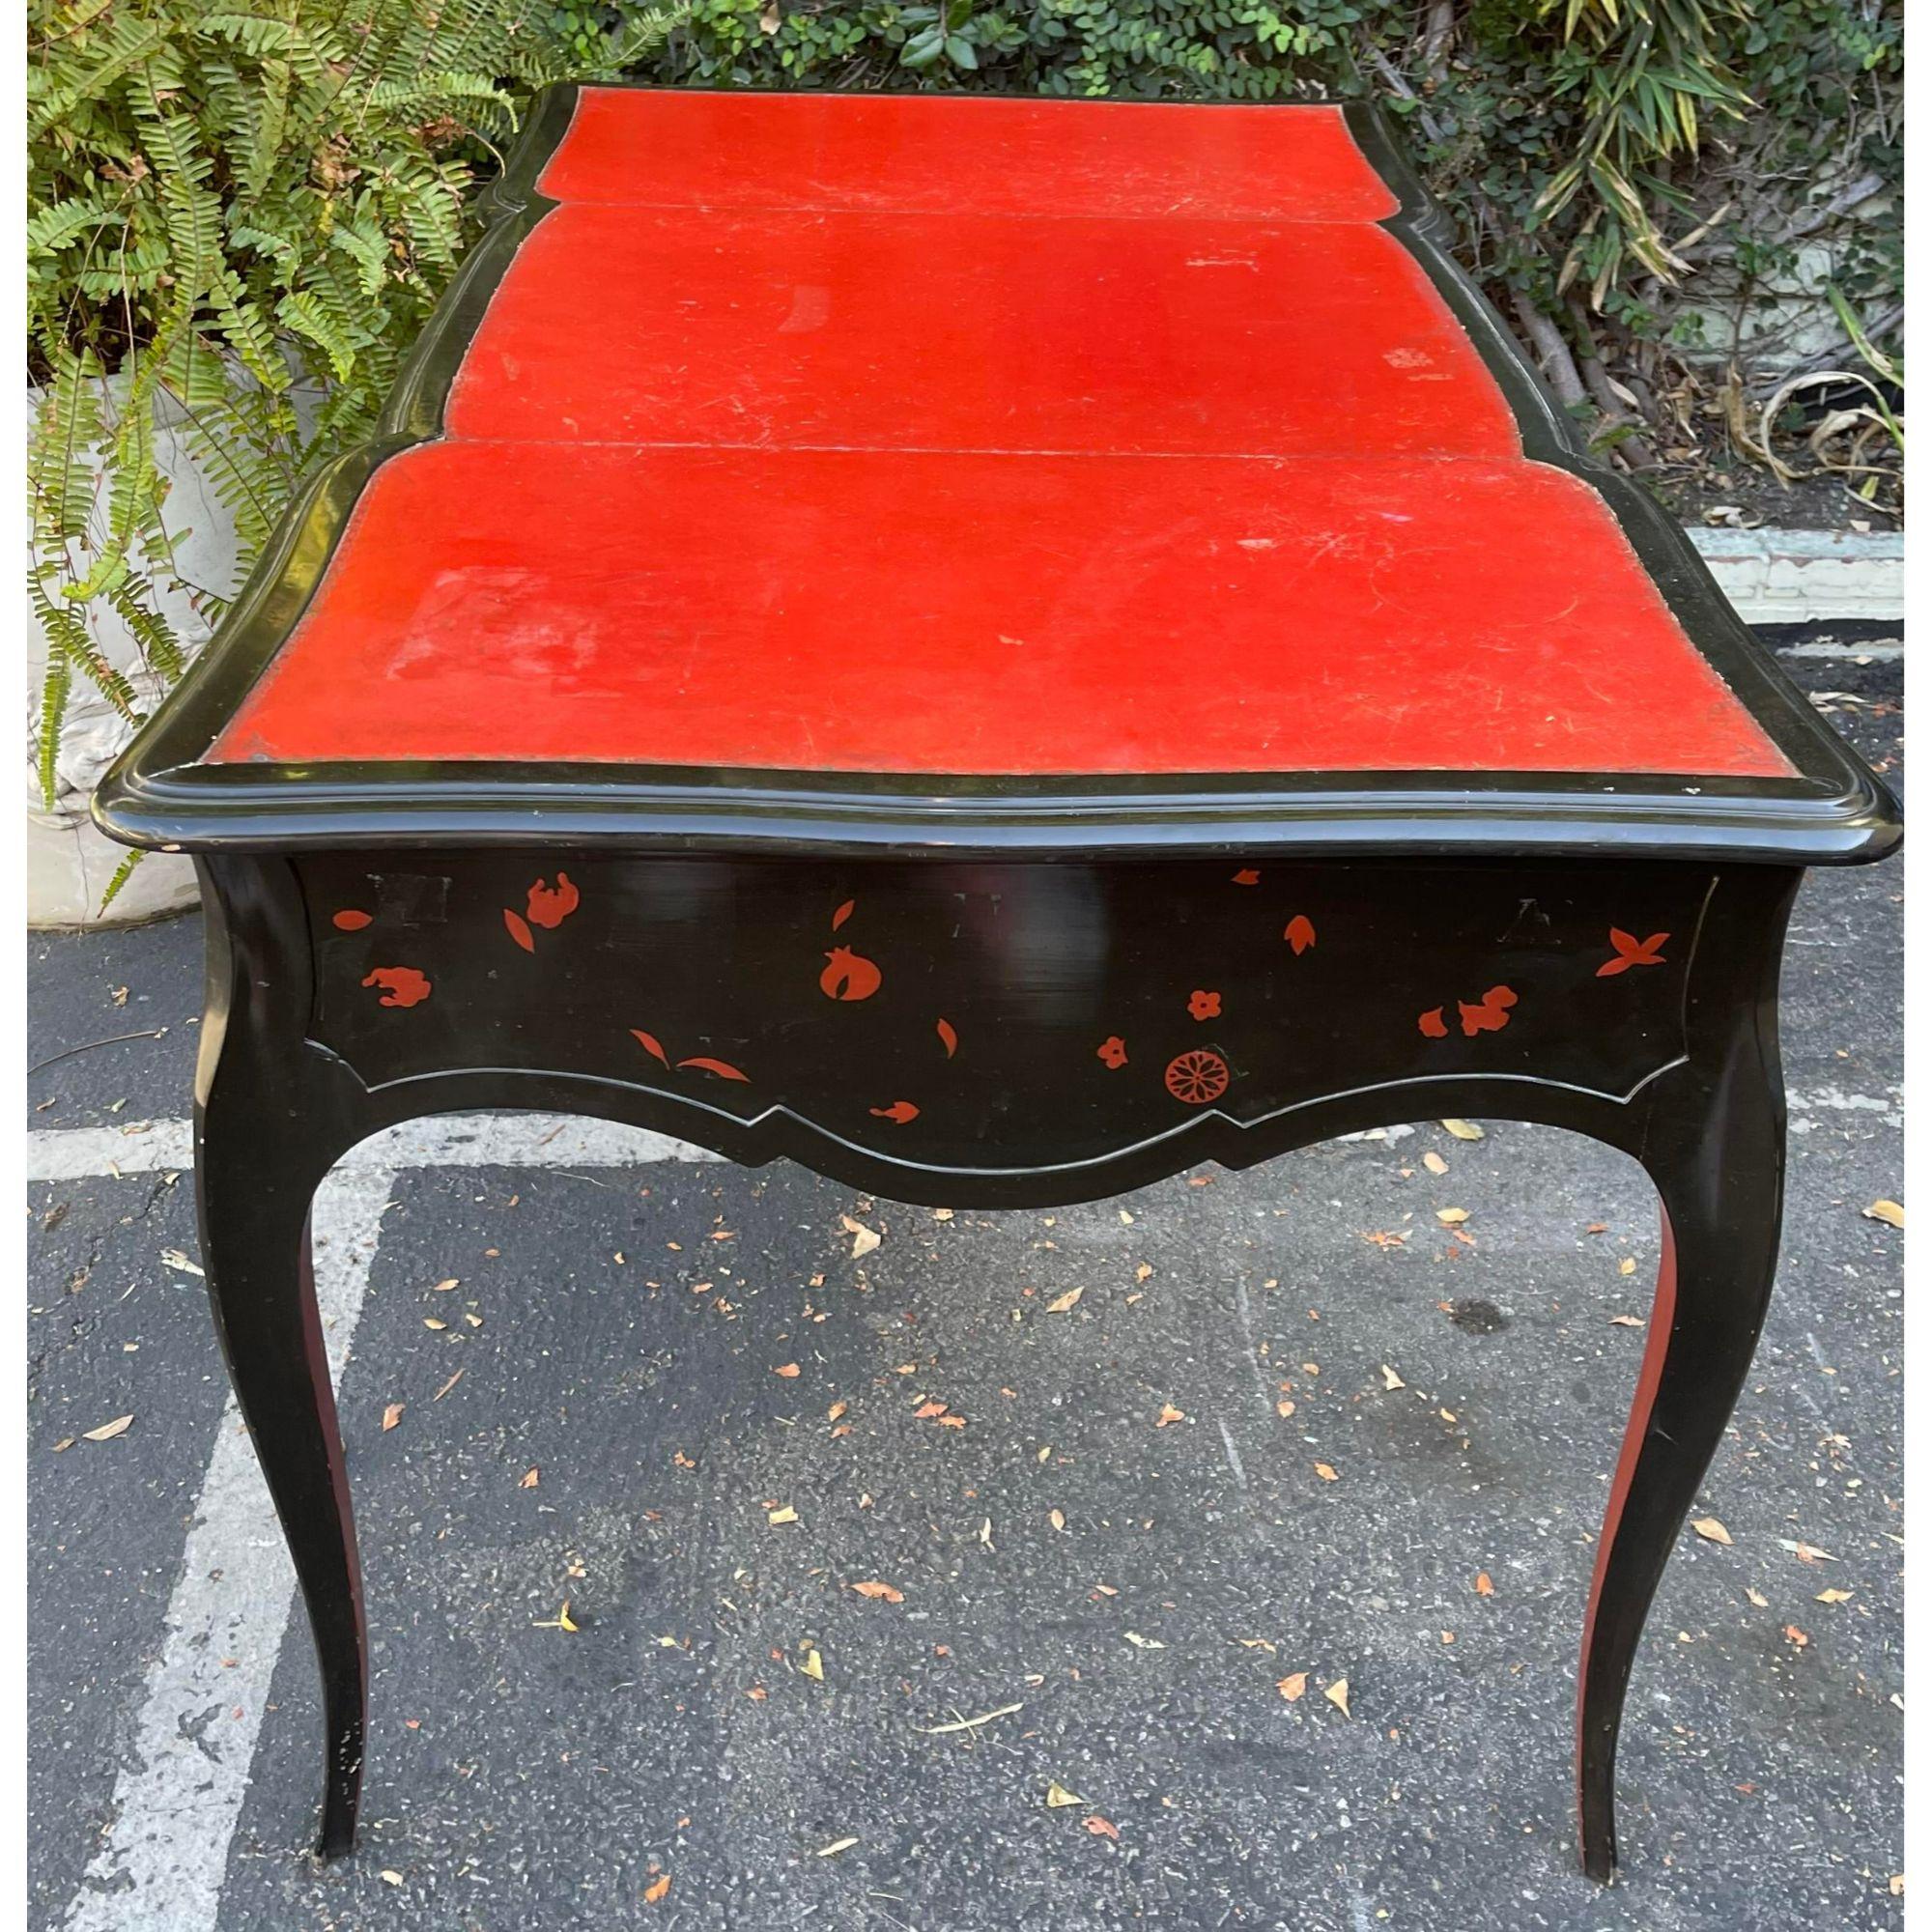 Antique Chinoiserie black lacquer red leather bureau plat writing table desk

Additional information: 
Materials: LacquerLeatherWood
Color: Black
Period: 19th Century
Styles: Chinoiserie
Table Shape: Other (unique shapes)
Item Type: Vintage,